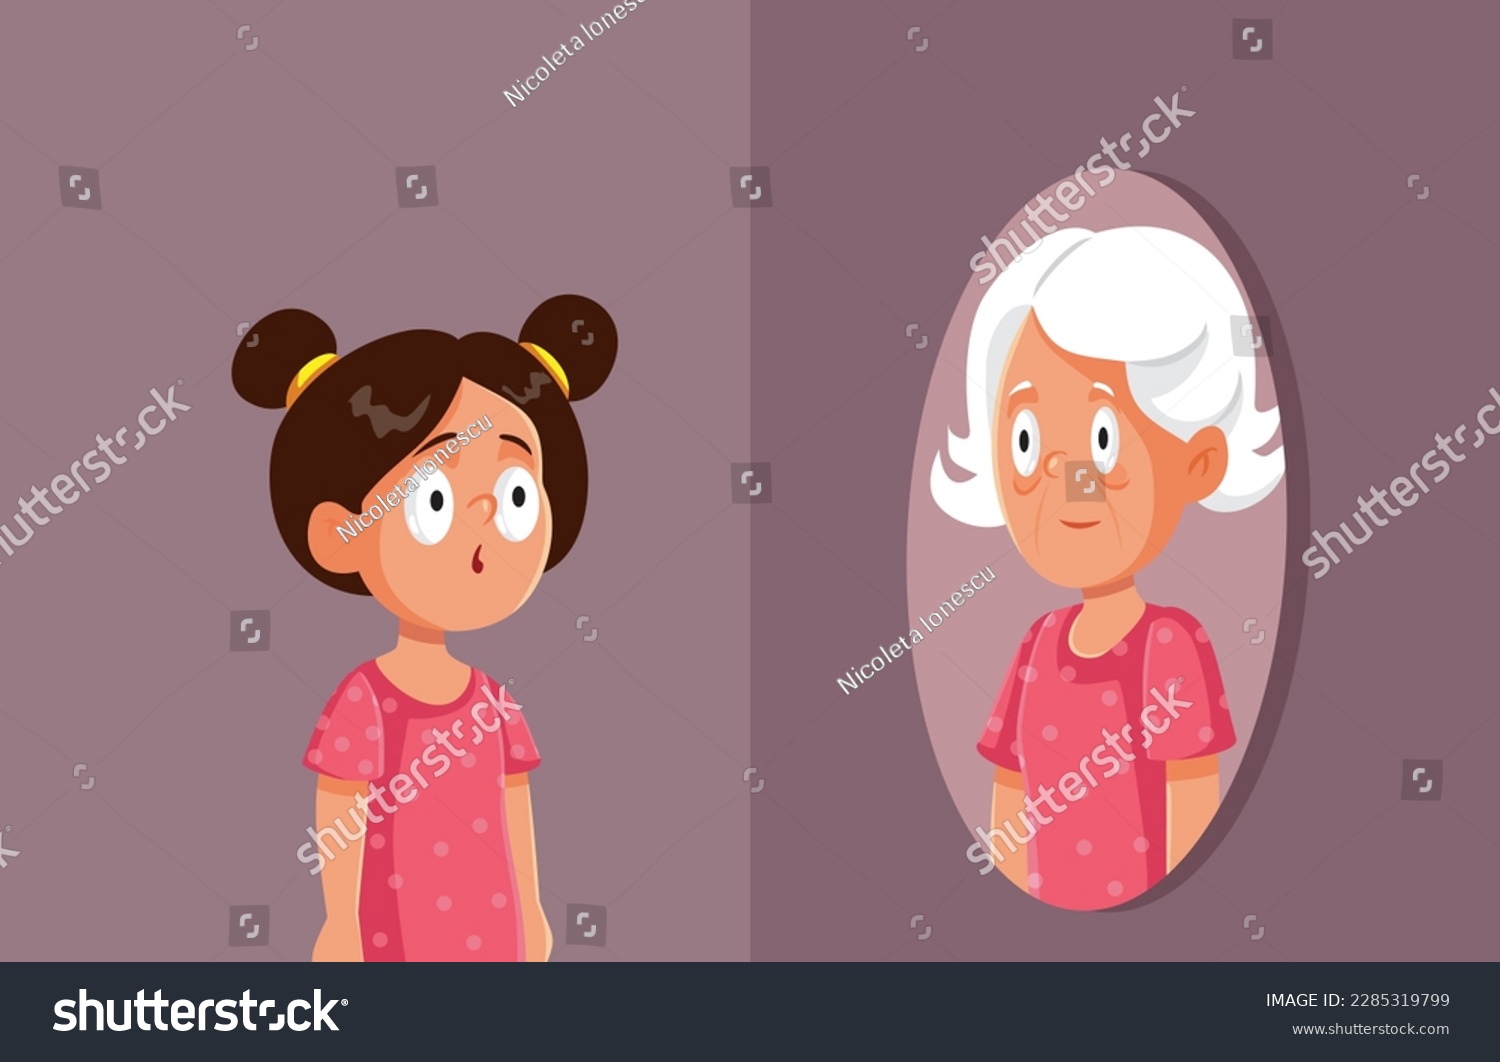 SVG of 
Little Girl Looking in the Mirror Seeing her Older Self Vector Cartoon. Young child thinking about growing older
 svg